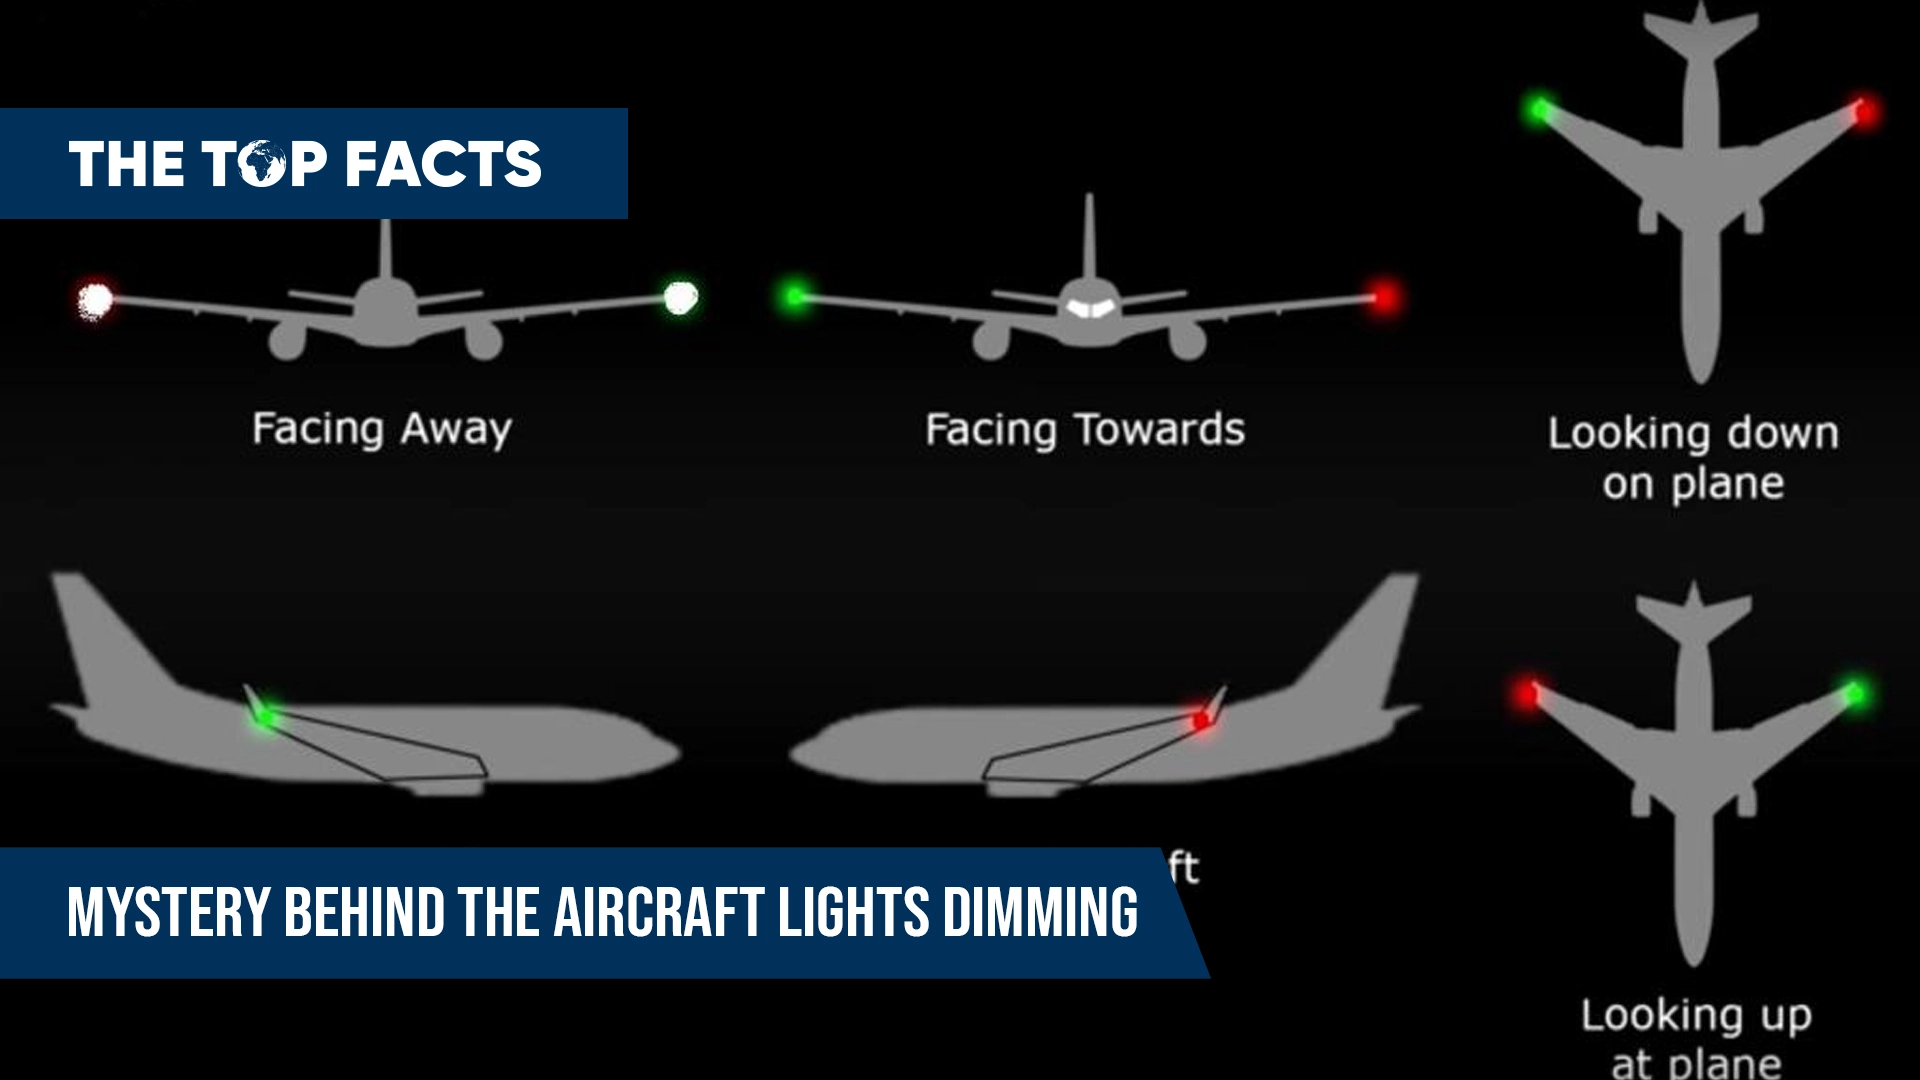 Mystery behind the Aircraft lights dimming